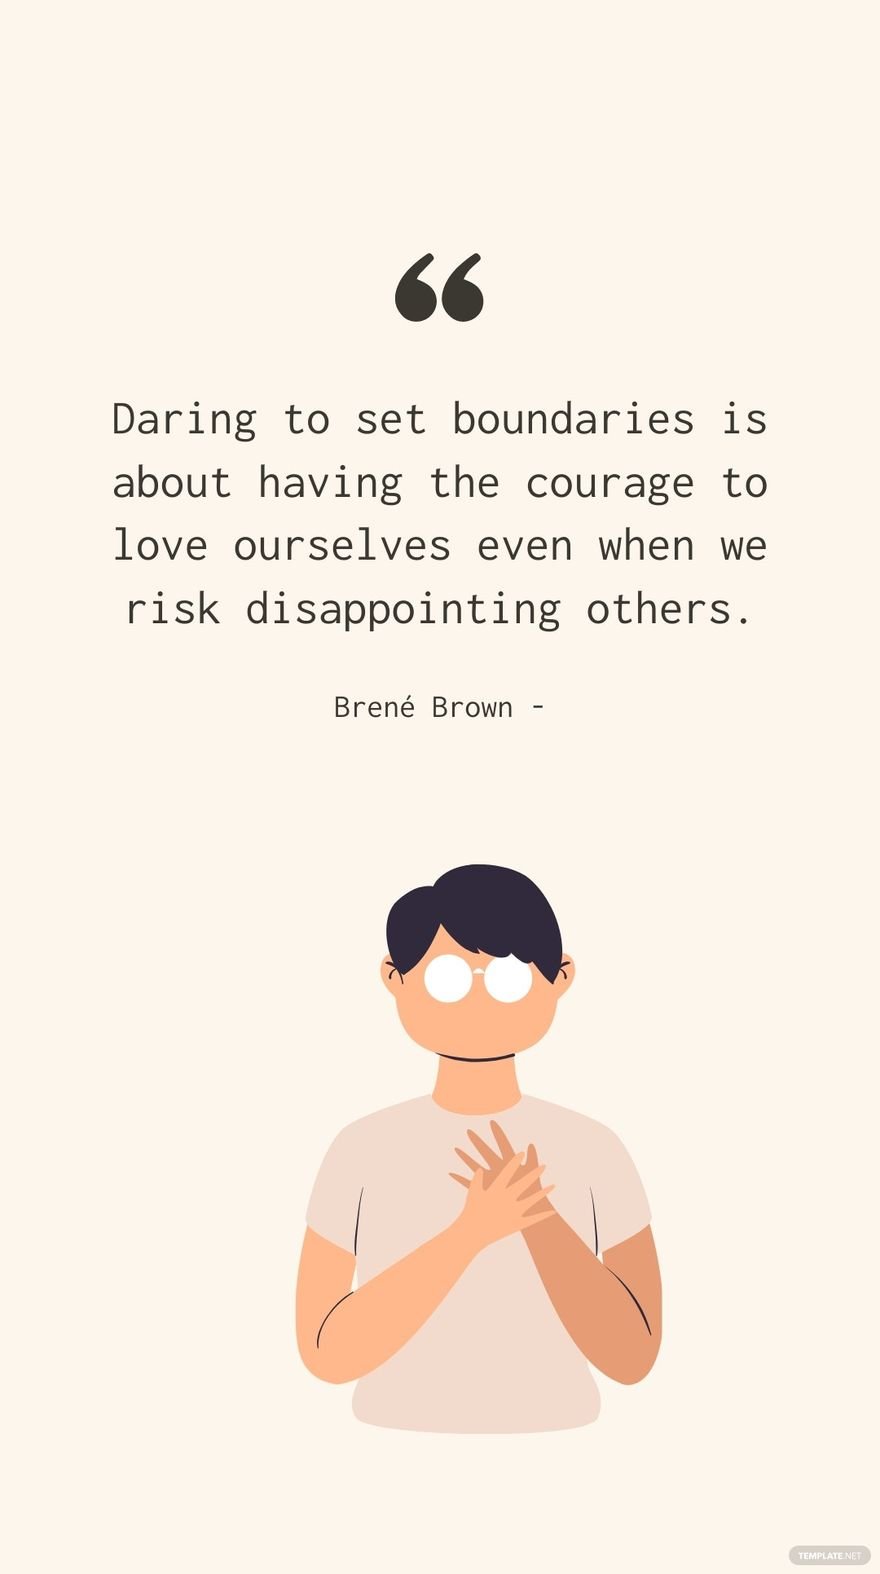 Free Brené Brown - Daring to set boundaries is about having the courage to love ourselves even when we risk disappointing others. in JPG